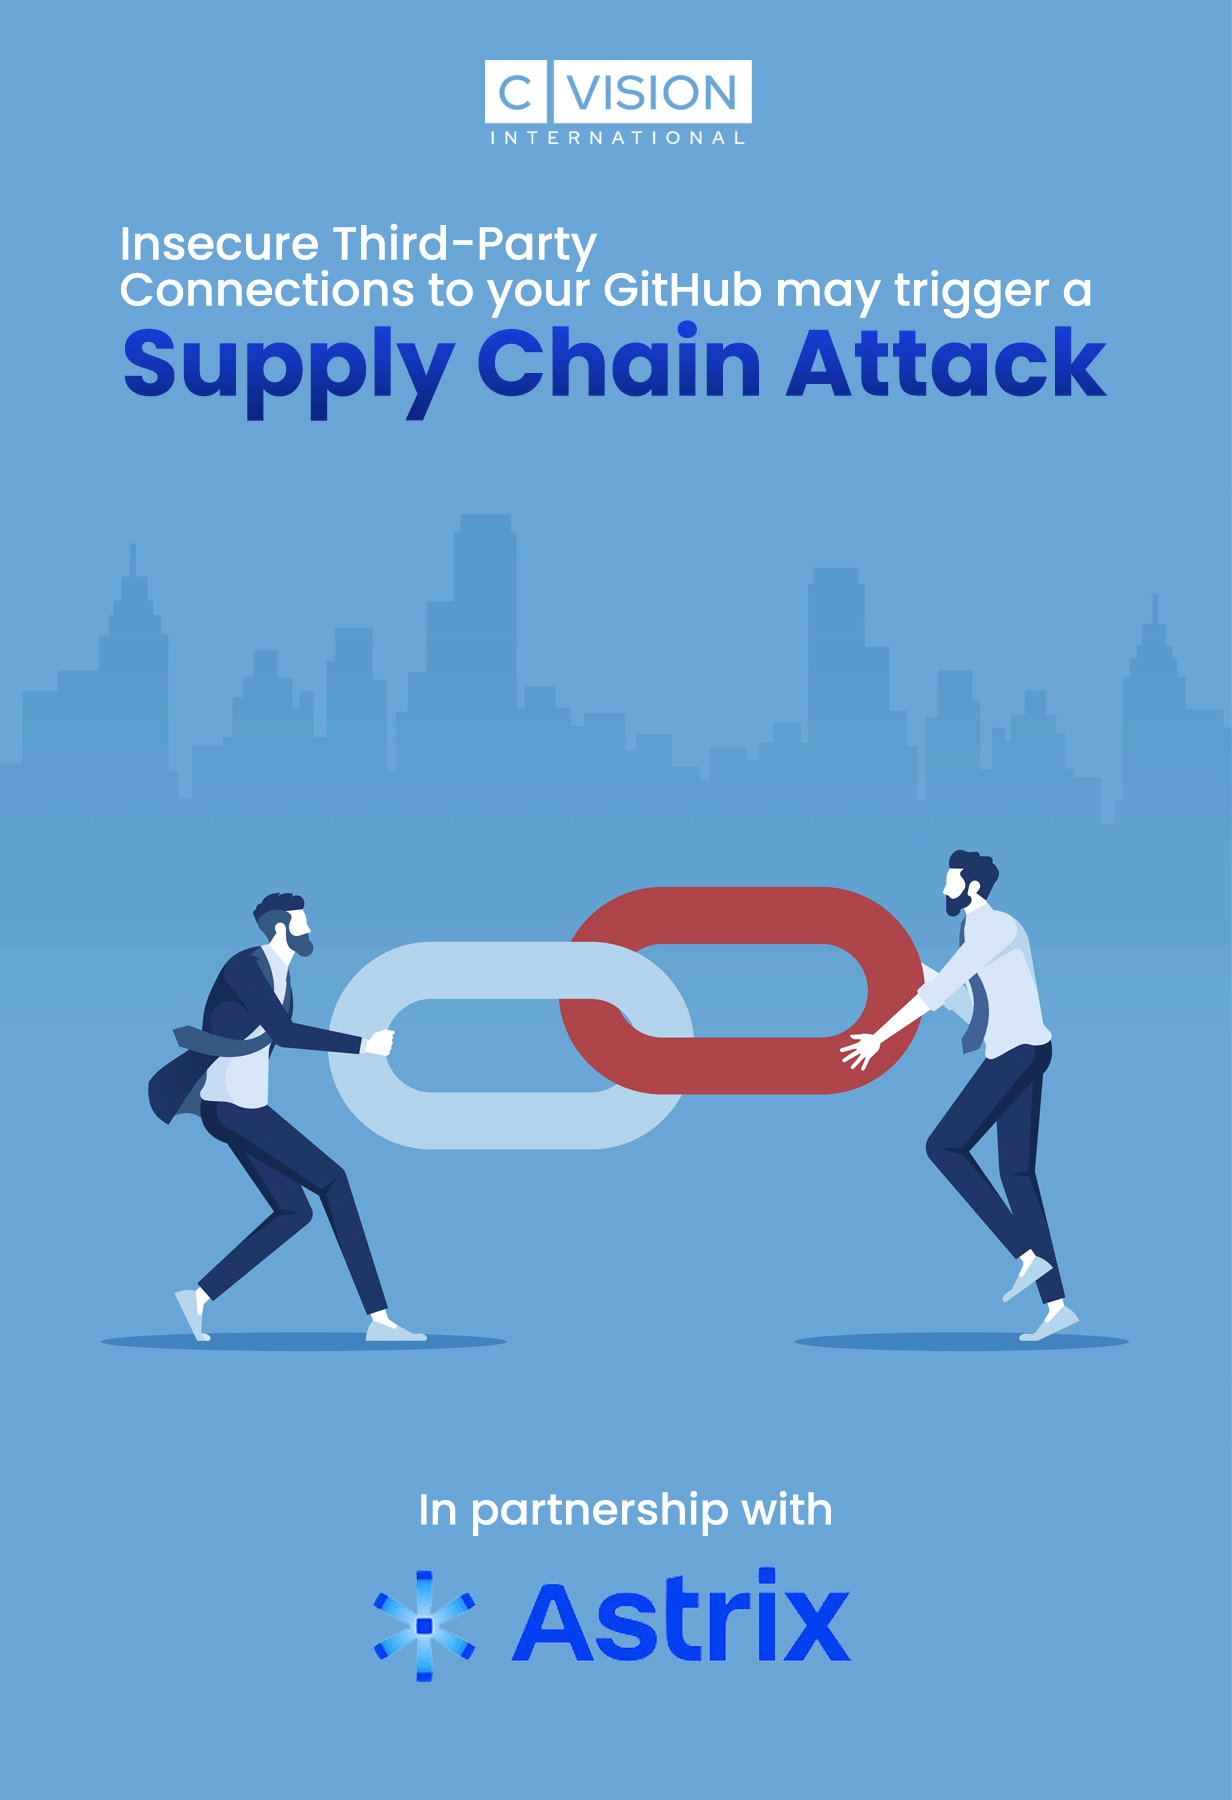 Insecure Third-Party Connections to your GitHub may Trigger a Supply Chain Attack